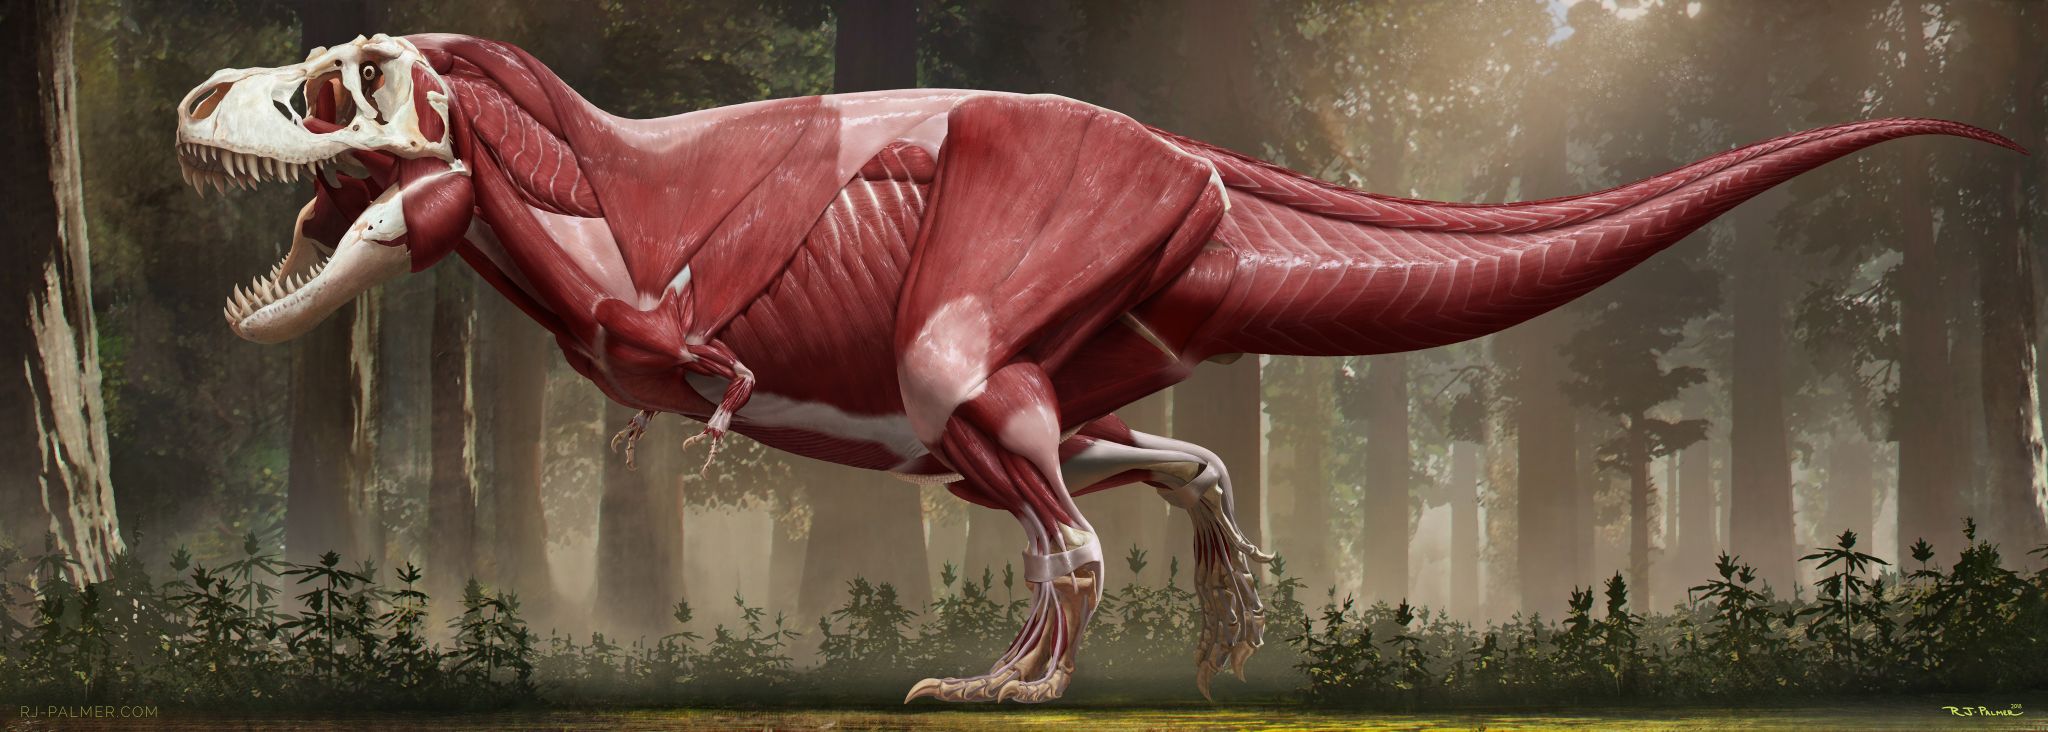 I updated this old T Rex painting with the most scientifically accurate  version to date : r/Dinosaurs